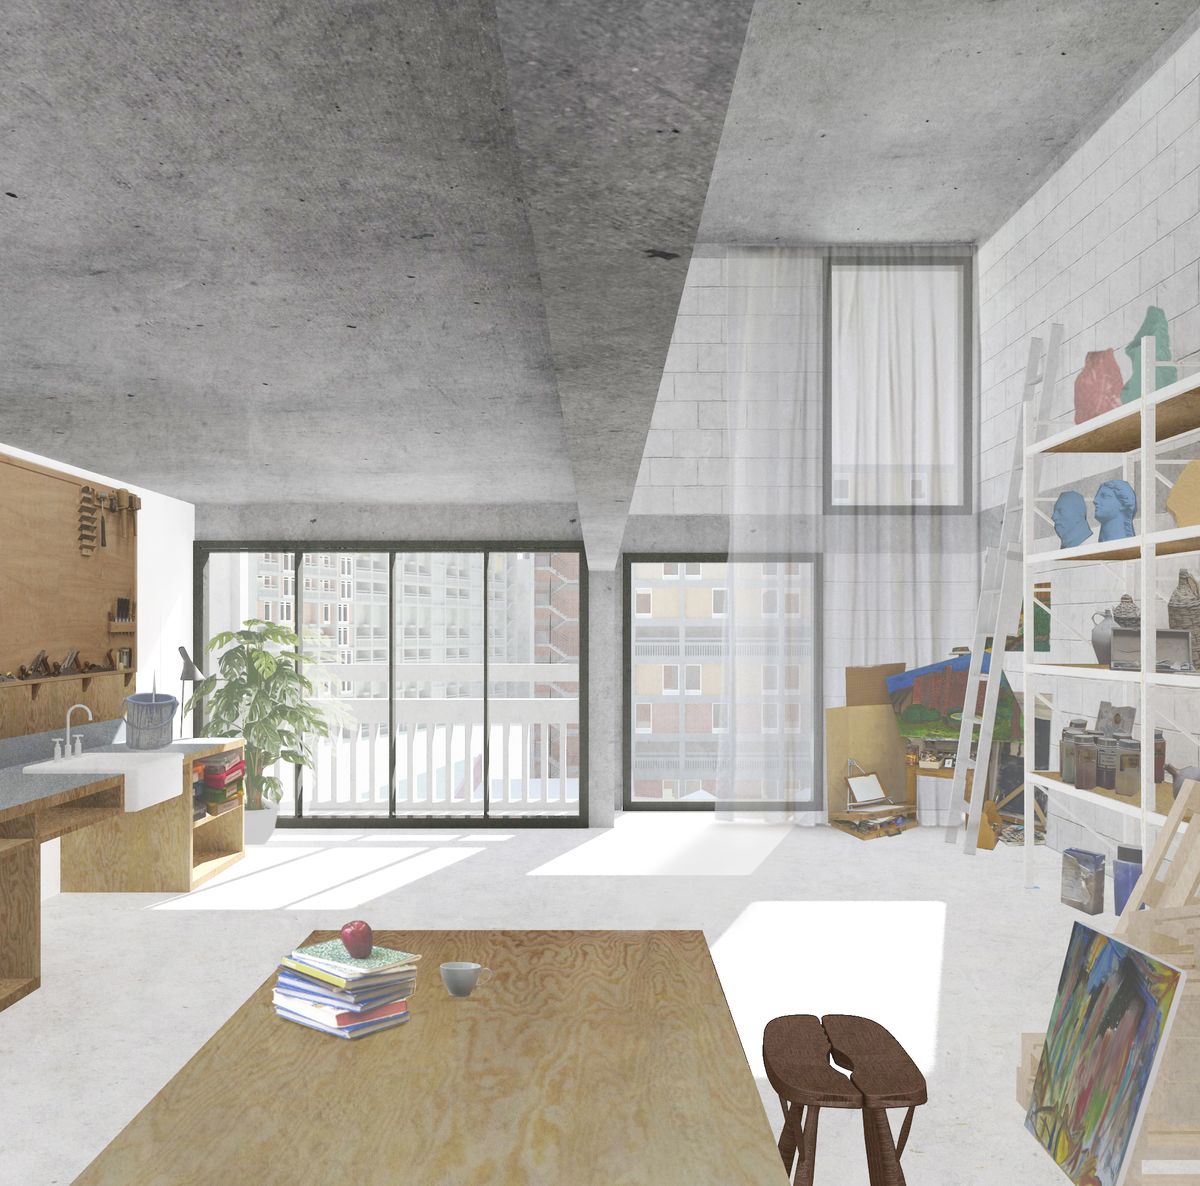 A rendering of one of the artists' studios to be created at Park Hill Carmody Groarke